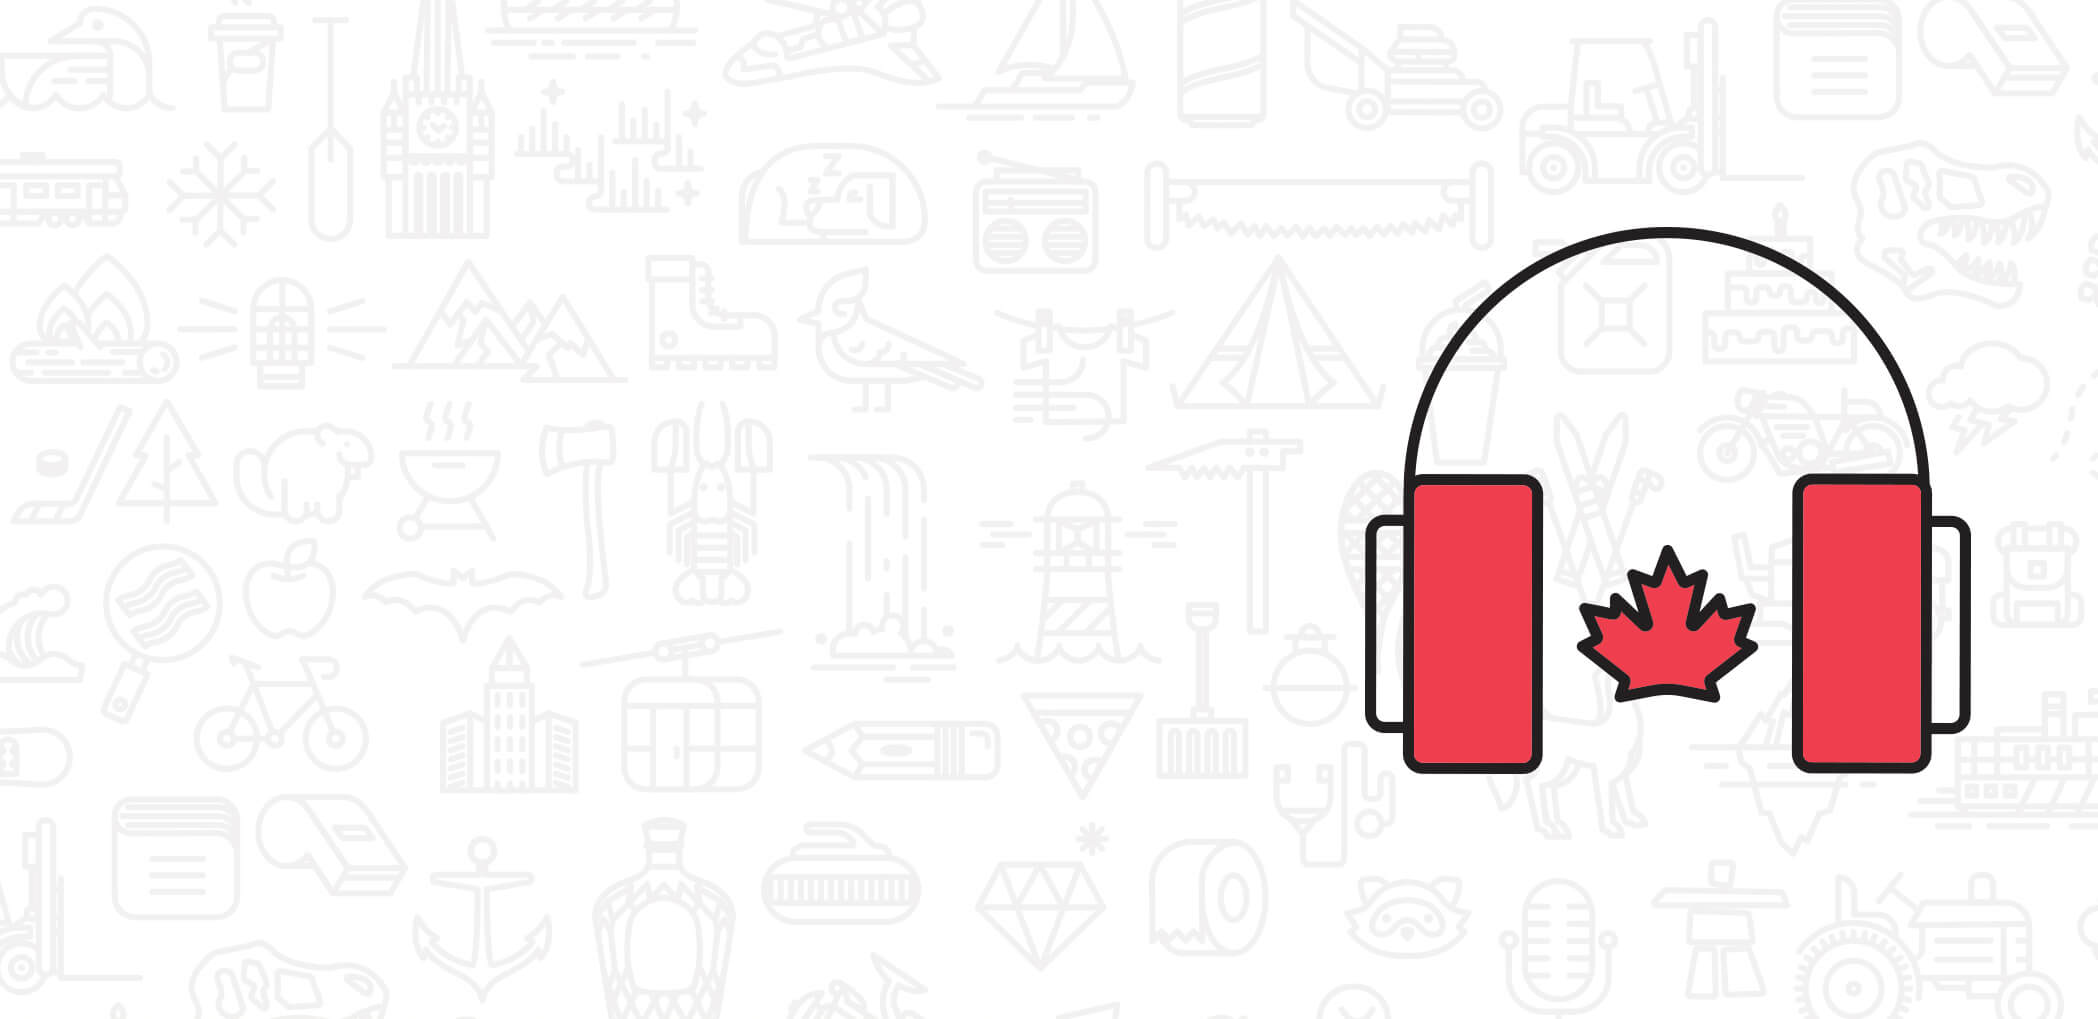 Light image of icons with large illustrated headphones